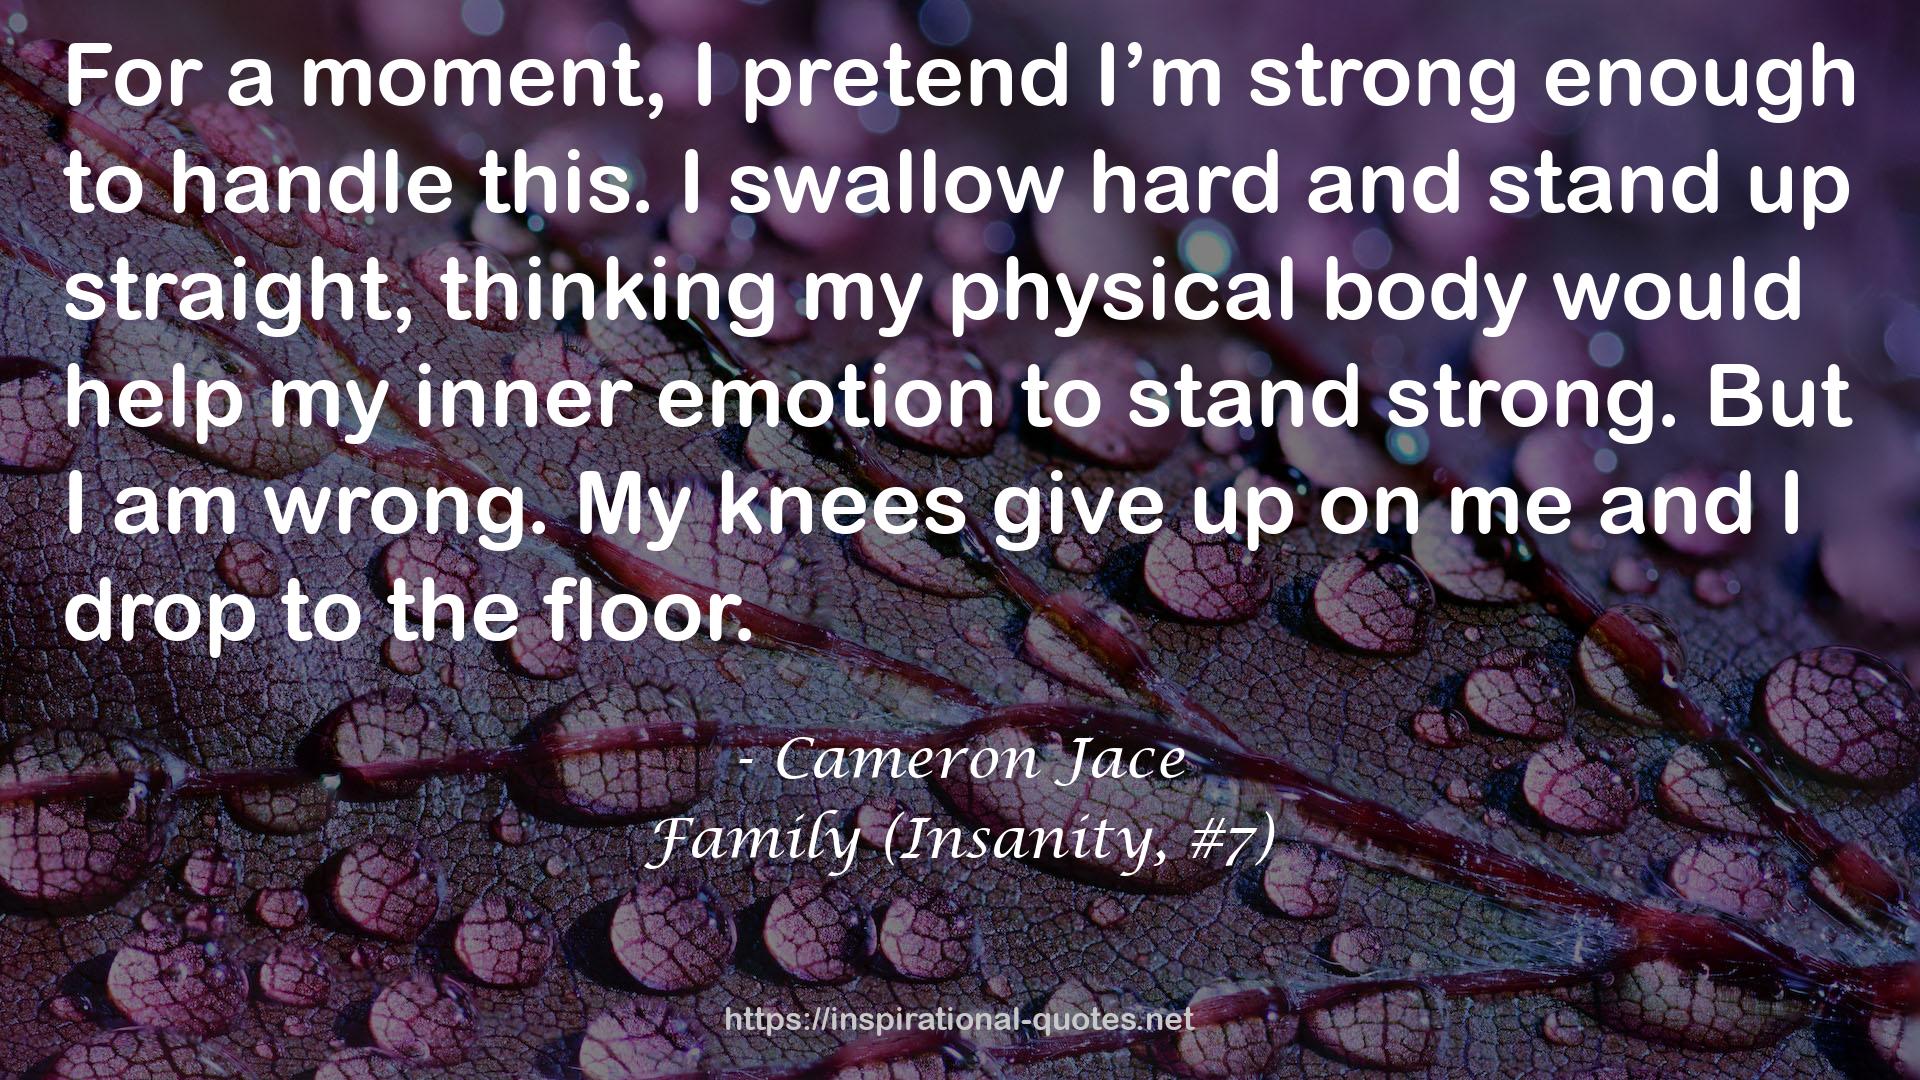 Family (Insanity, #7) QUOTES